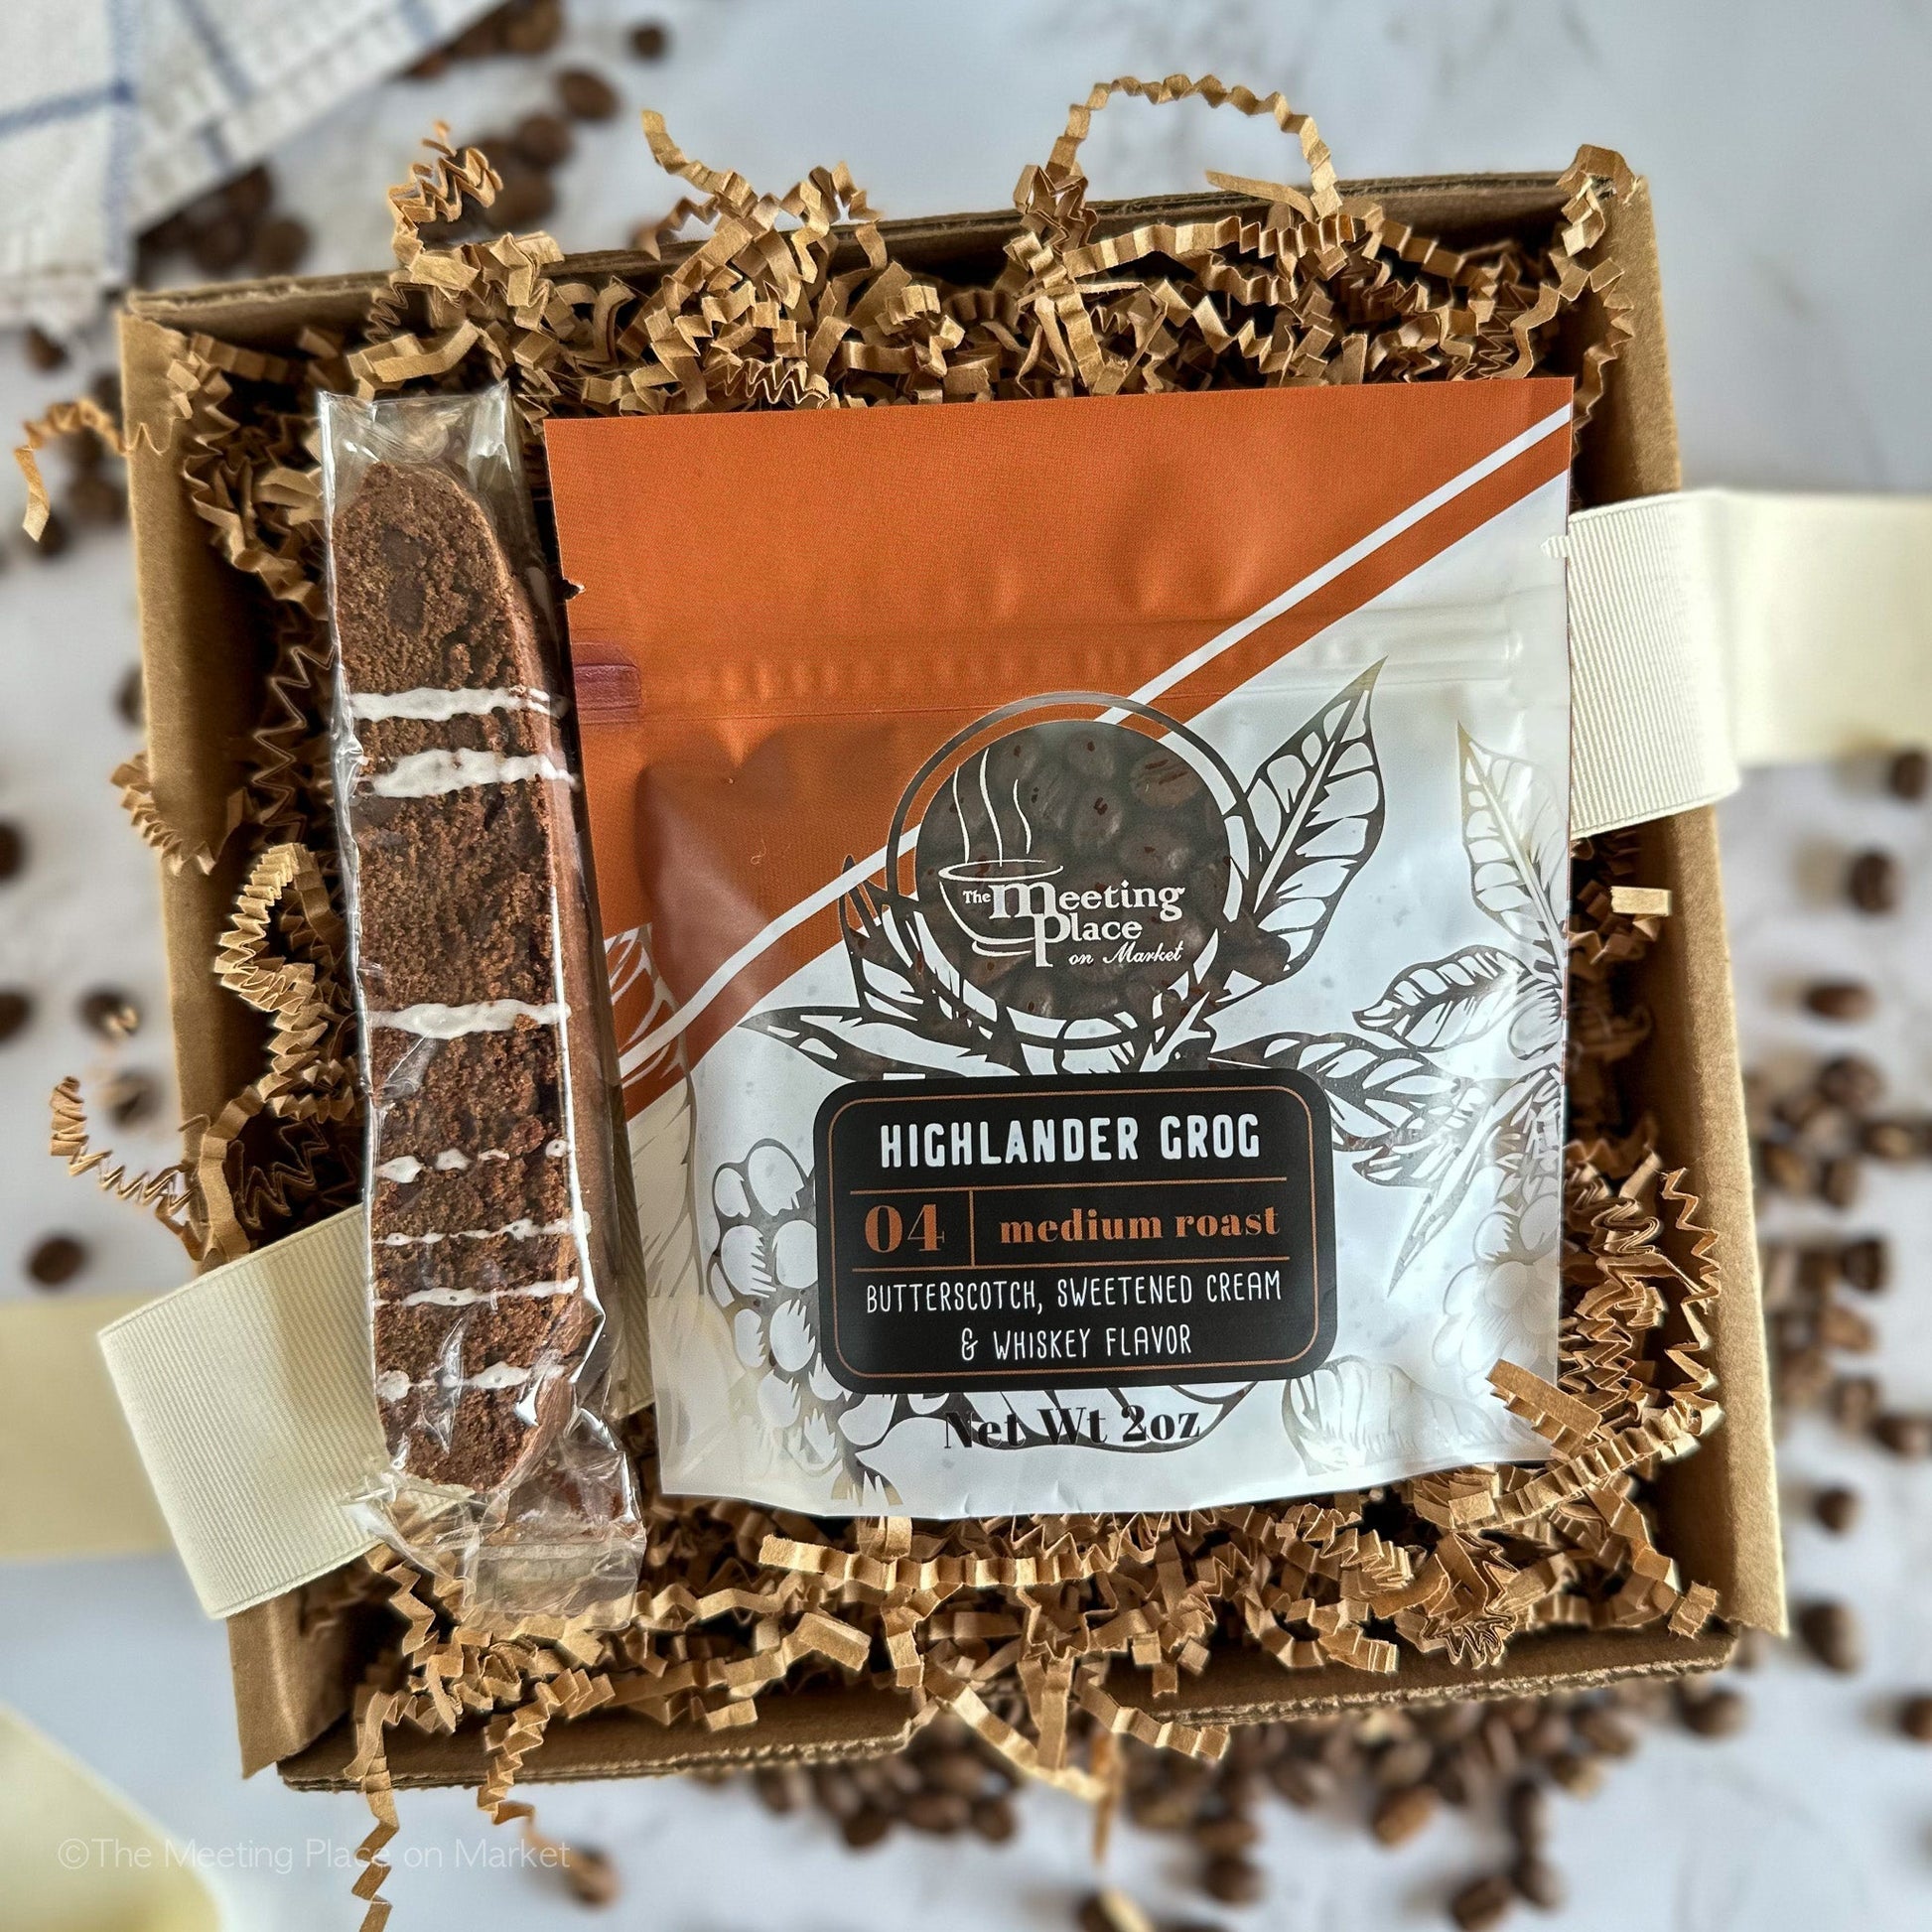 Hello Nerd Coffee Gift - Say It With Coffee CoffeeMail Gift Box - The Meeting Place on Market